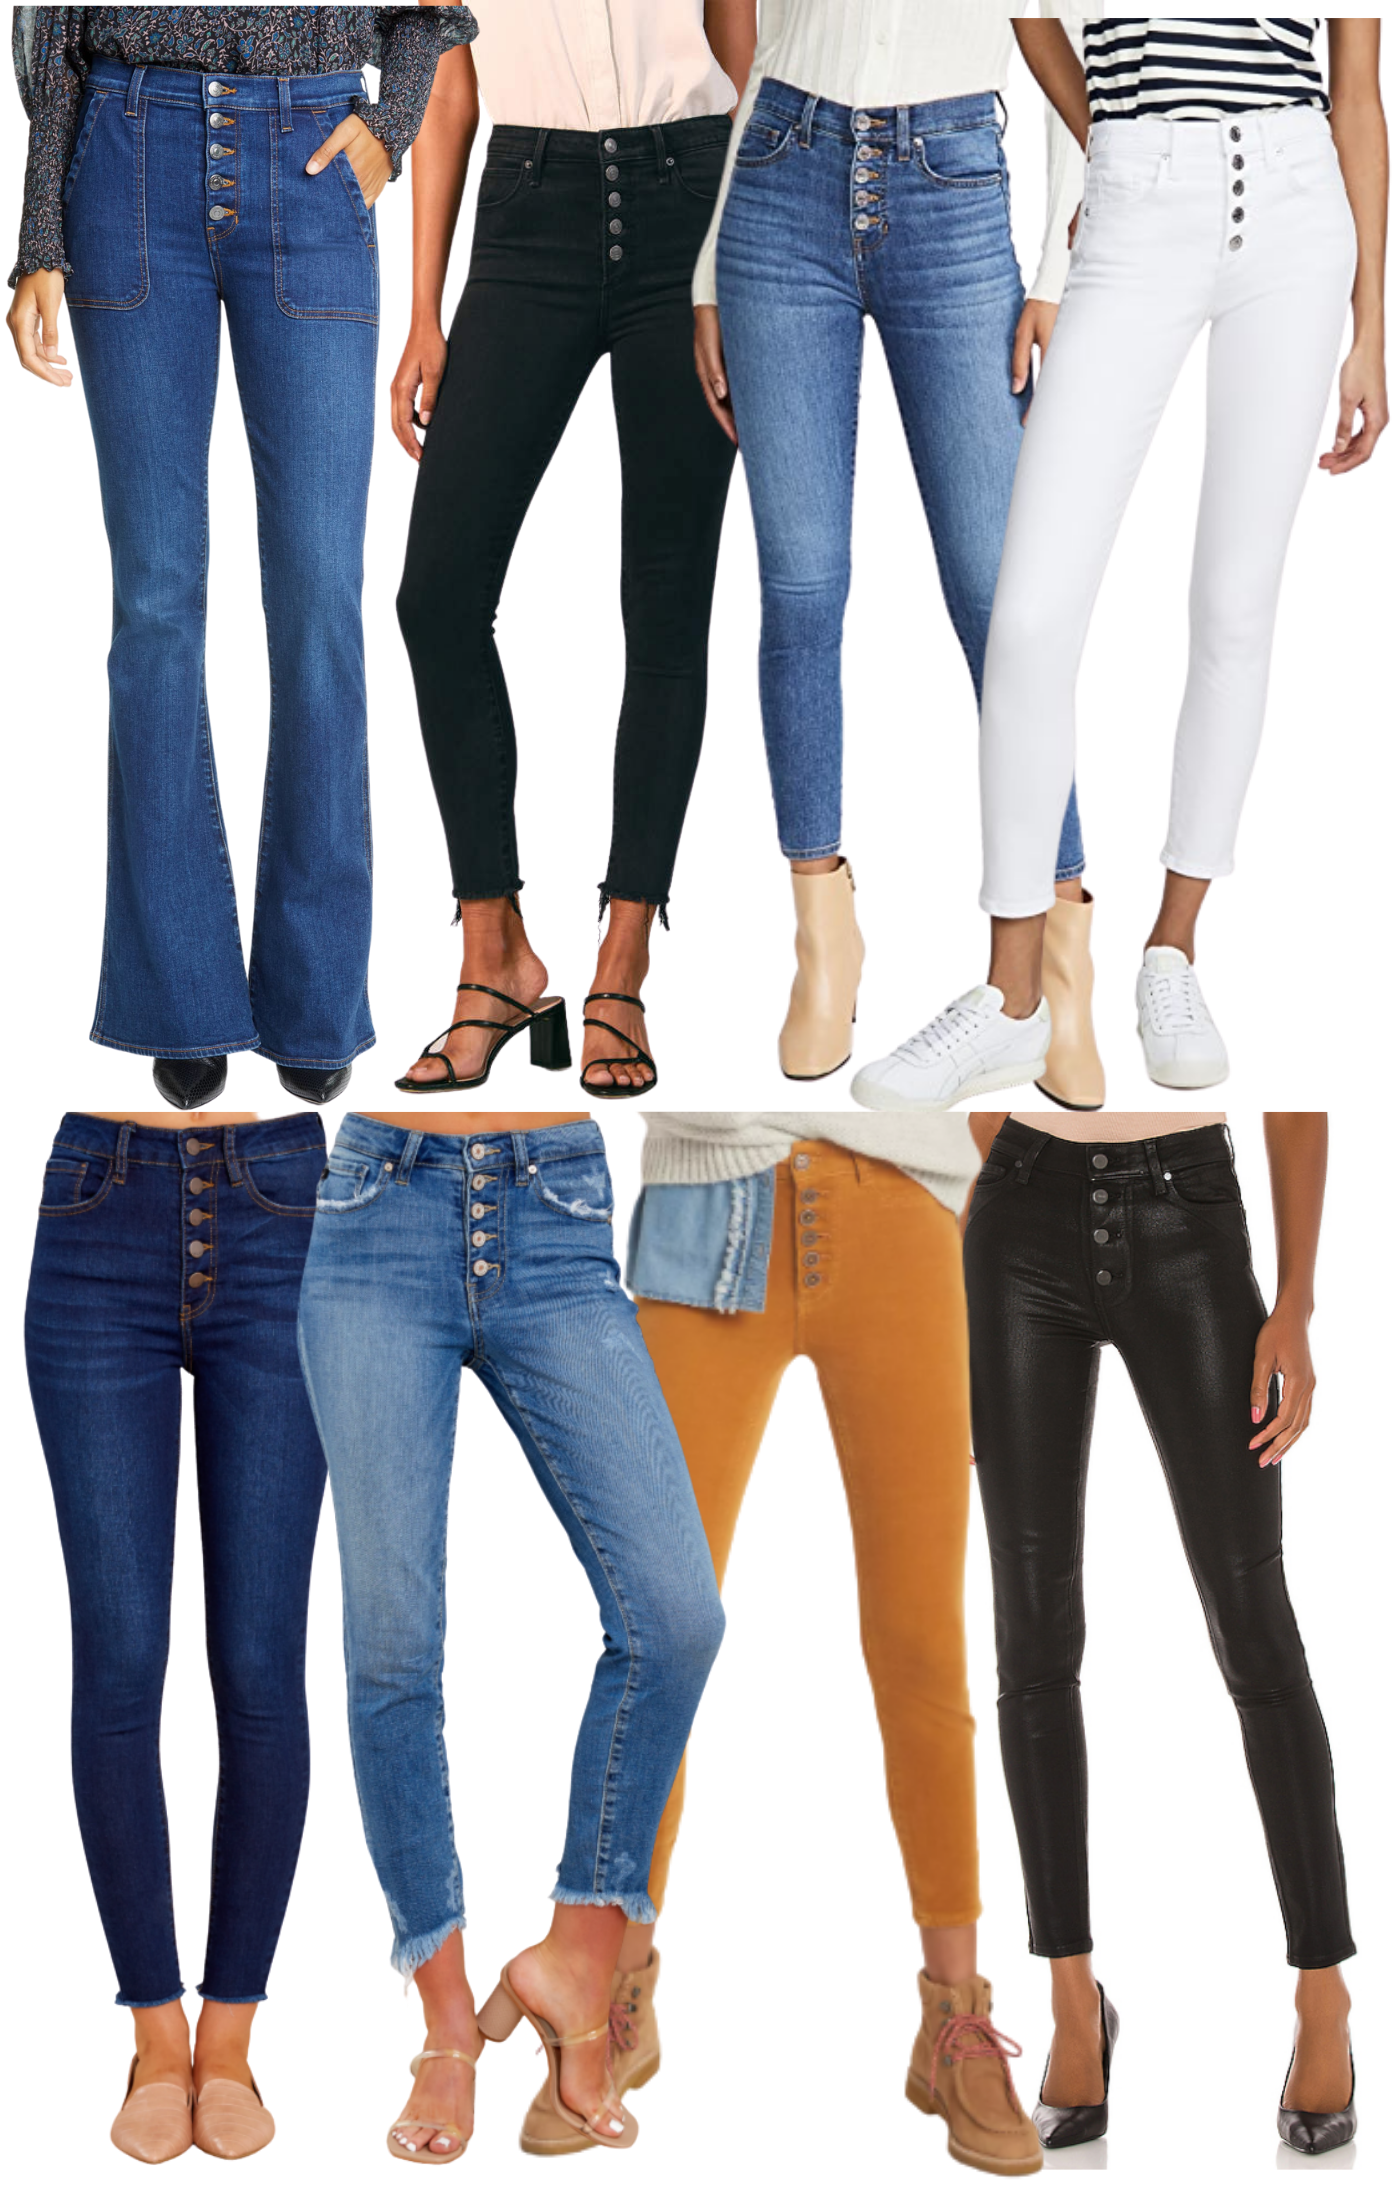 Fall Style: Exposed Button Jeans